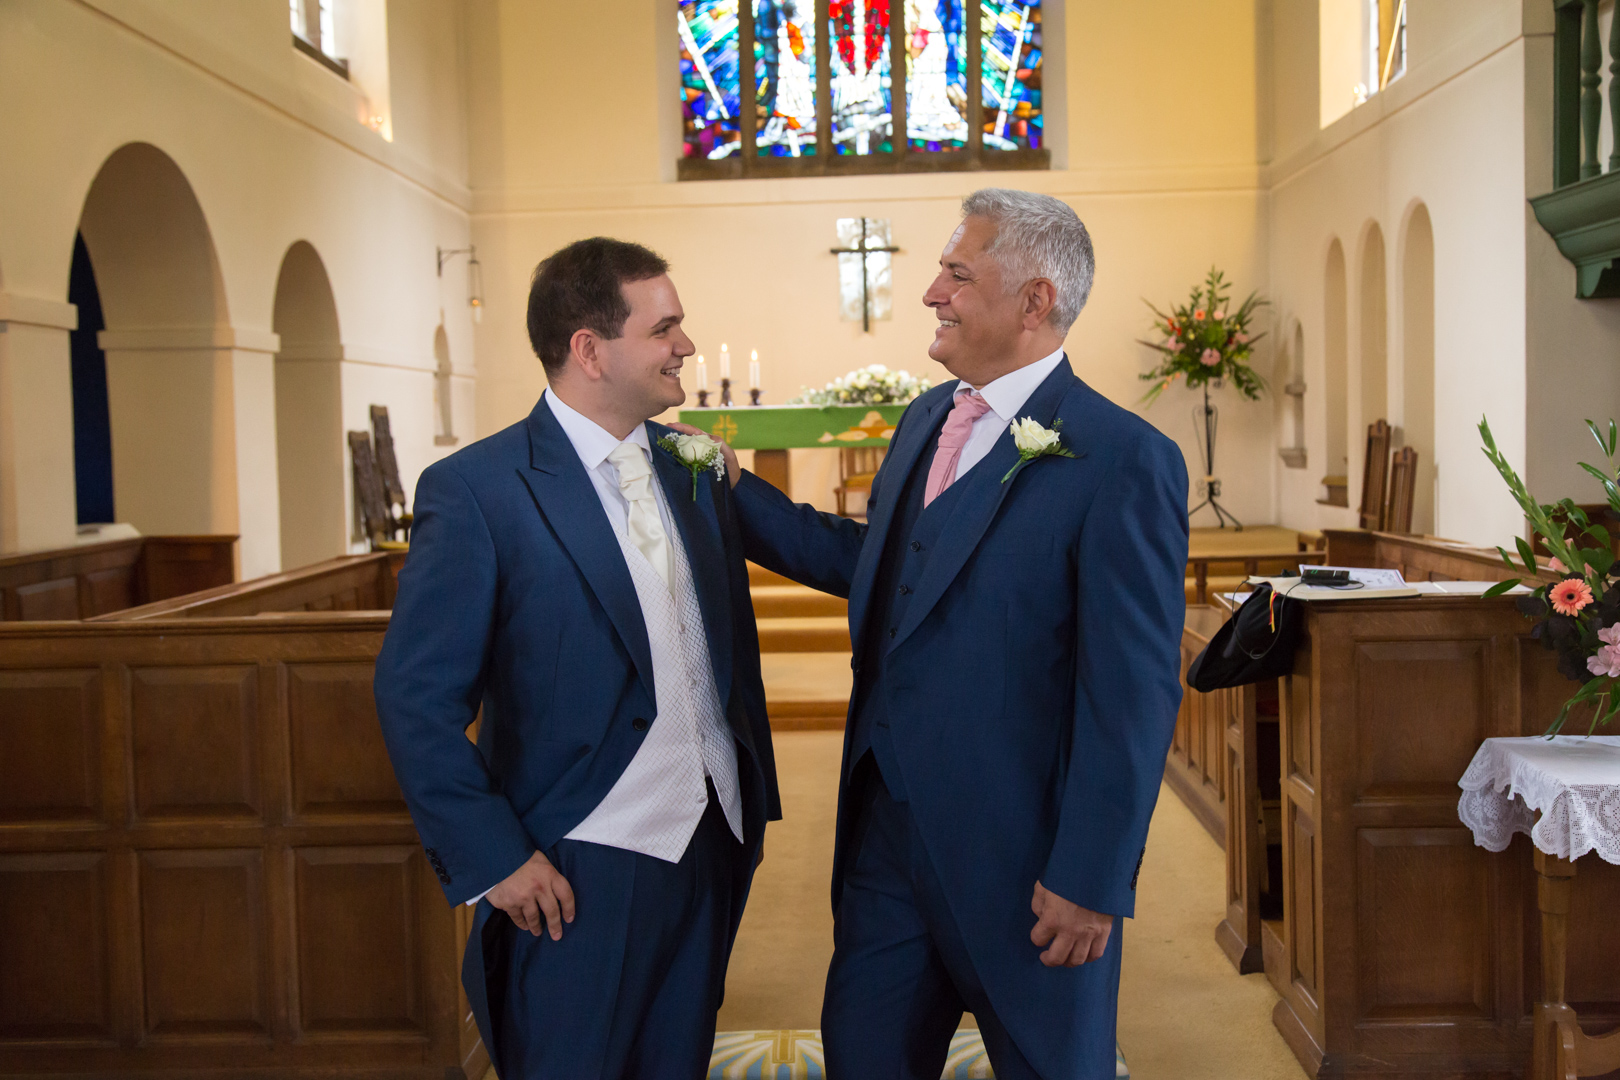 The Groom and his father photographed at St Lawrence's Church, Eastcote, Pinner Middlesex by Tim Durham of Pinner Wedding Photograph